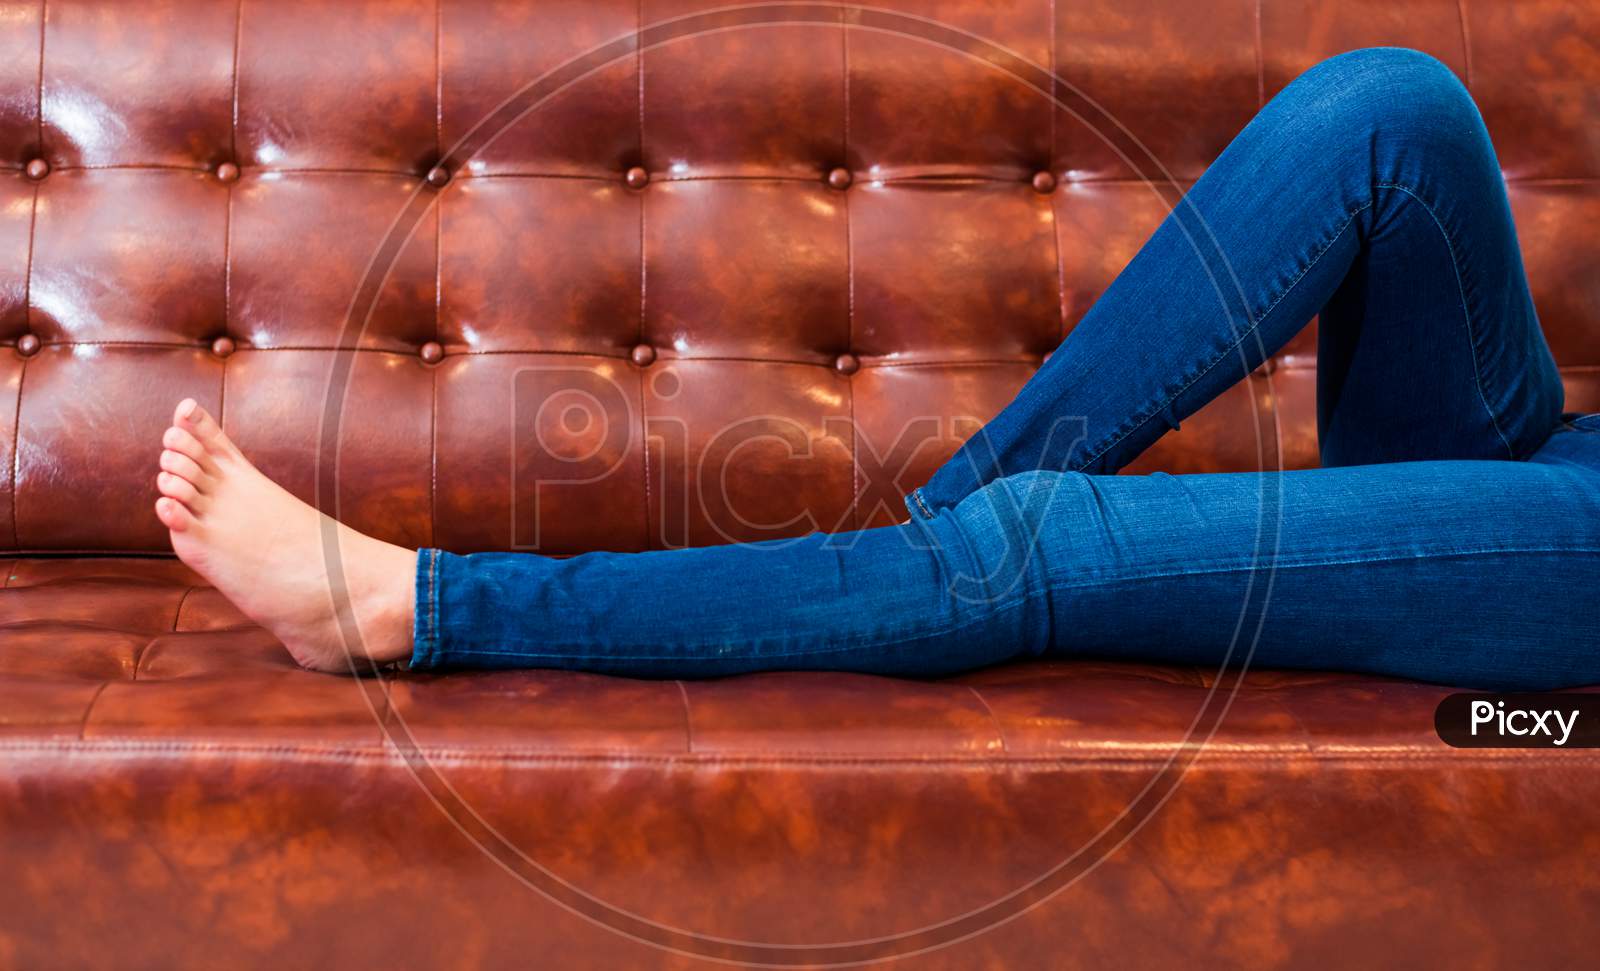 Woman Legs With Wearing Jeans While Relaxing At Movie Theater Or Home On Brown Leather Sofa, Relax And Holiday Concept, Bed Time Sleeping Concept. People Lifestyle And Holiday. Closeup Girl Foot